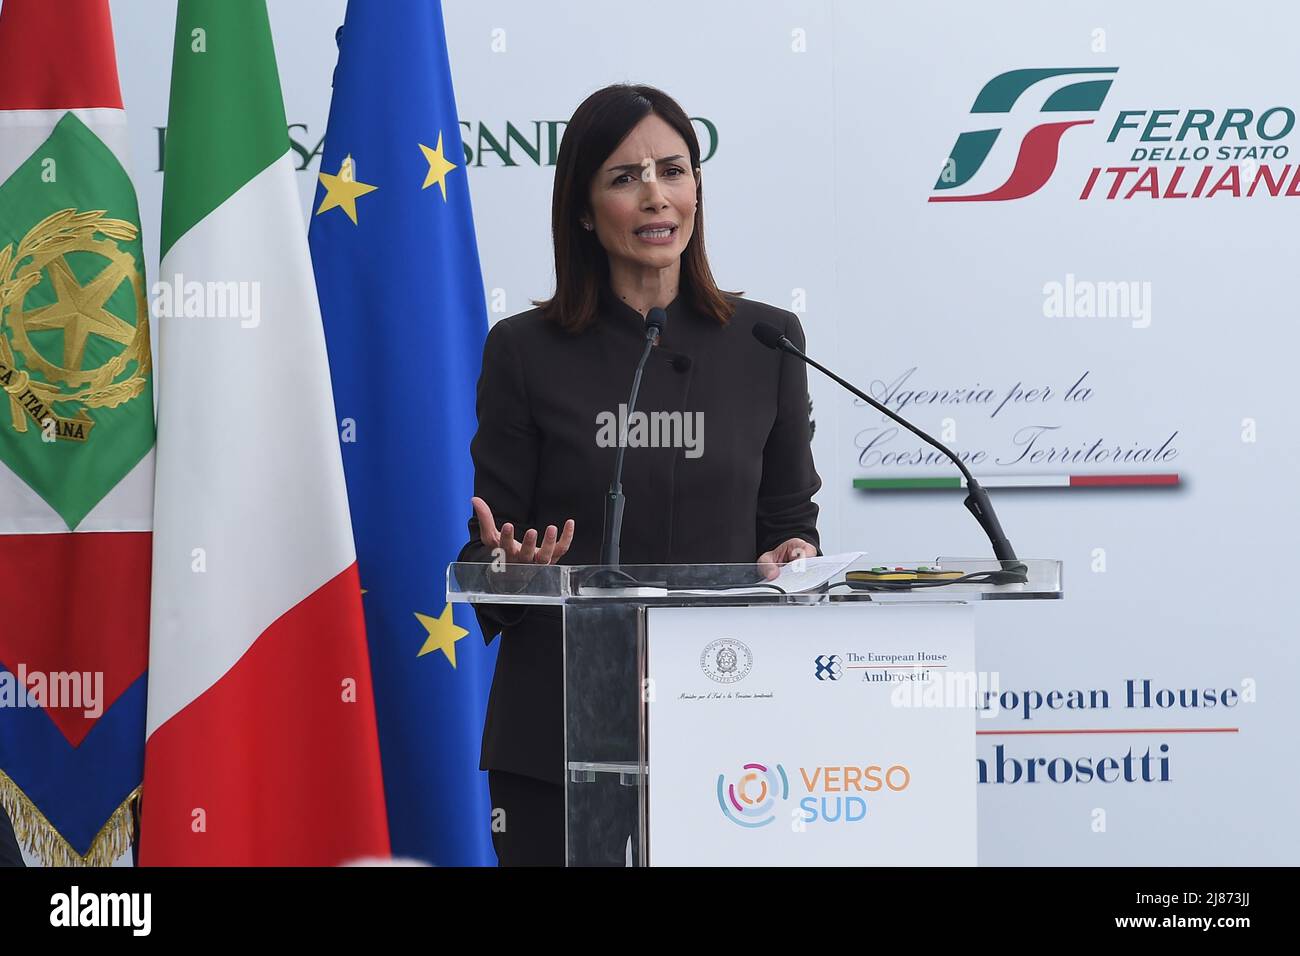 Sorrento, Italy. 13 May, 2022. Mara Carfagna Italian Minister for Southern Italy and Territorial Cohesion speaks at the 1st edition of ”Verso Sud” organized by the European House - Ambrosetti in Sorrento, Naples Italy on 13 May 2022. Credit:Franco Romano/Alamy Live News Stock Photo